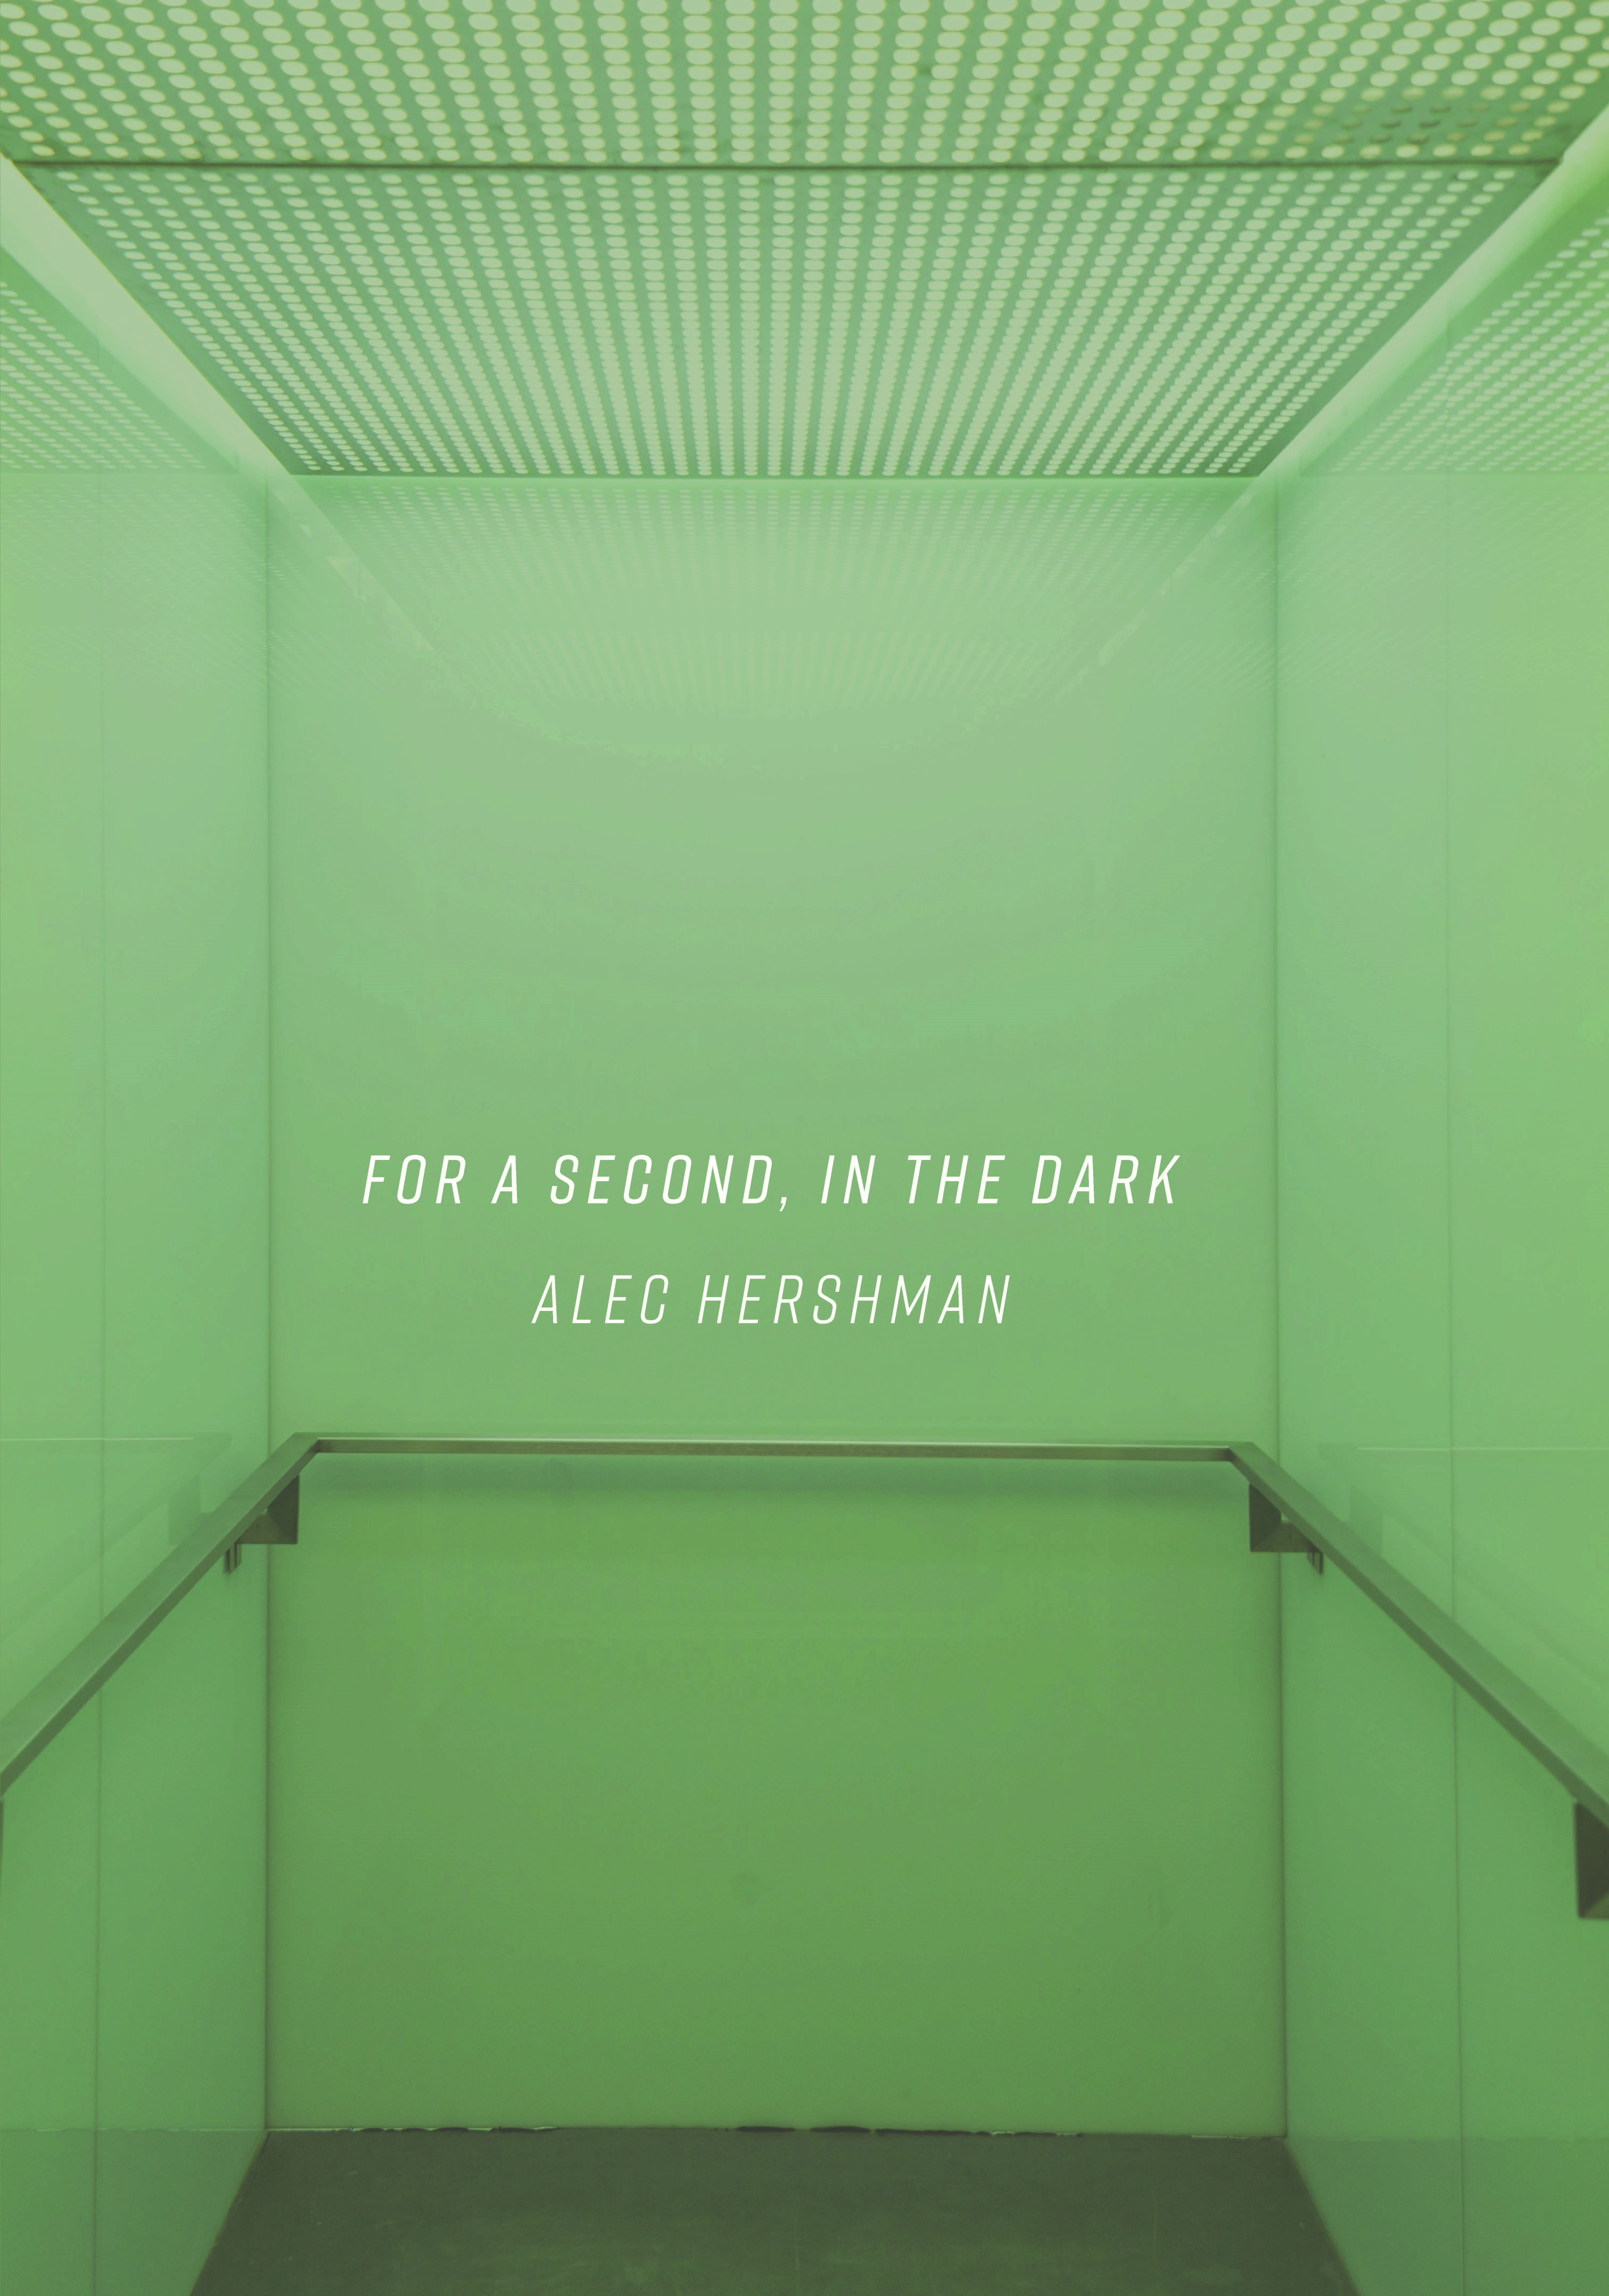 FOR A SECOND, IN THE DARK by Alec Hershman – Pre-Order Today! Available 10/1!